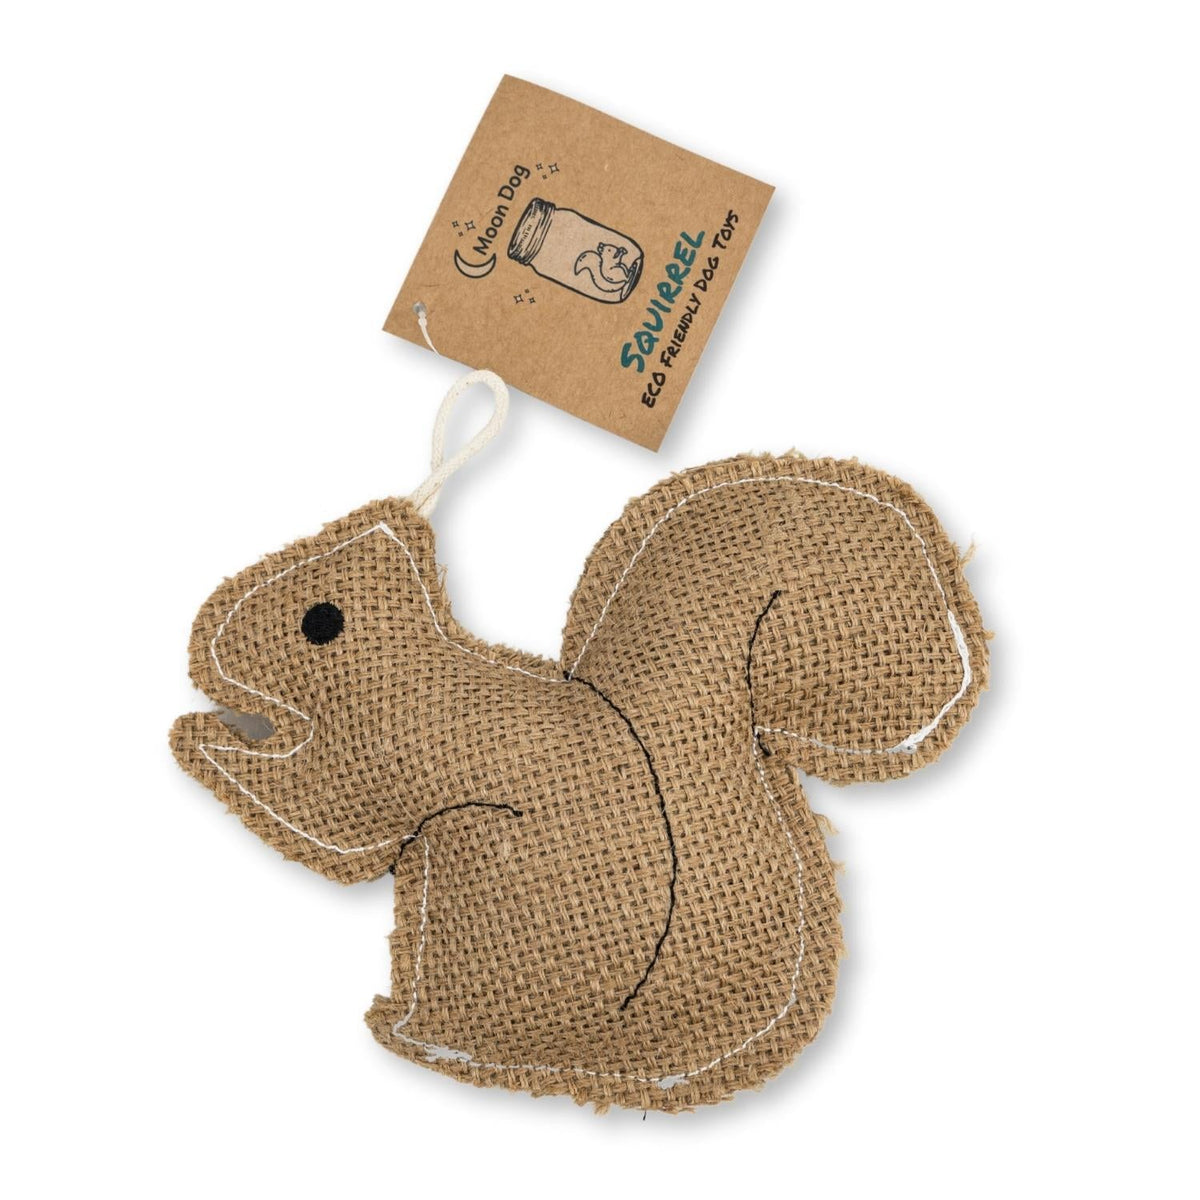 Rustic Jute Squirrel: Sustainable Eco Dog Chew Toy by American Pet Supplies